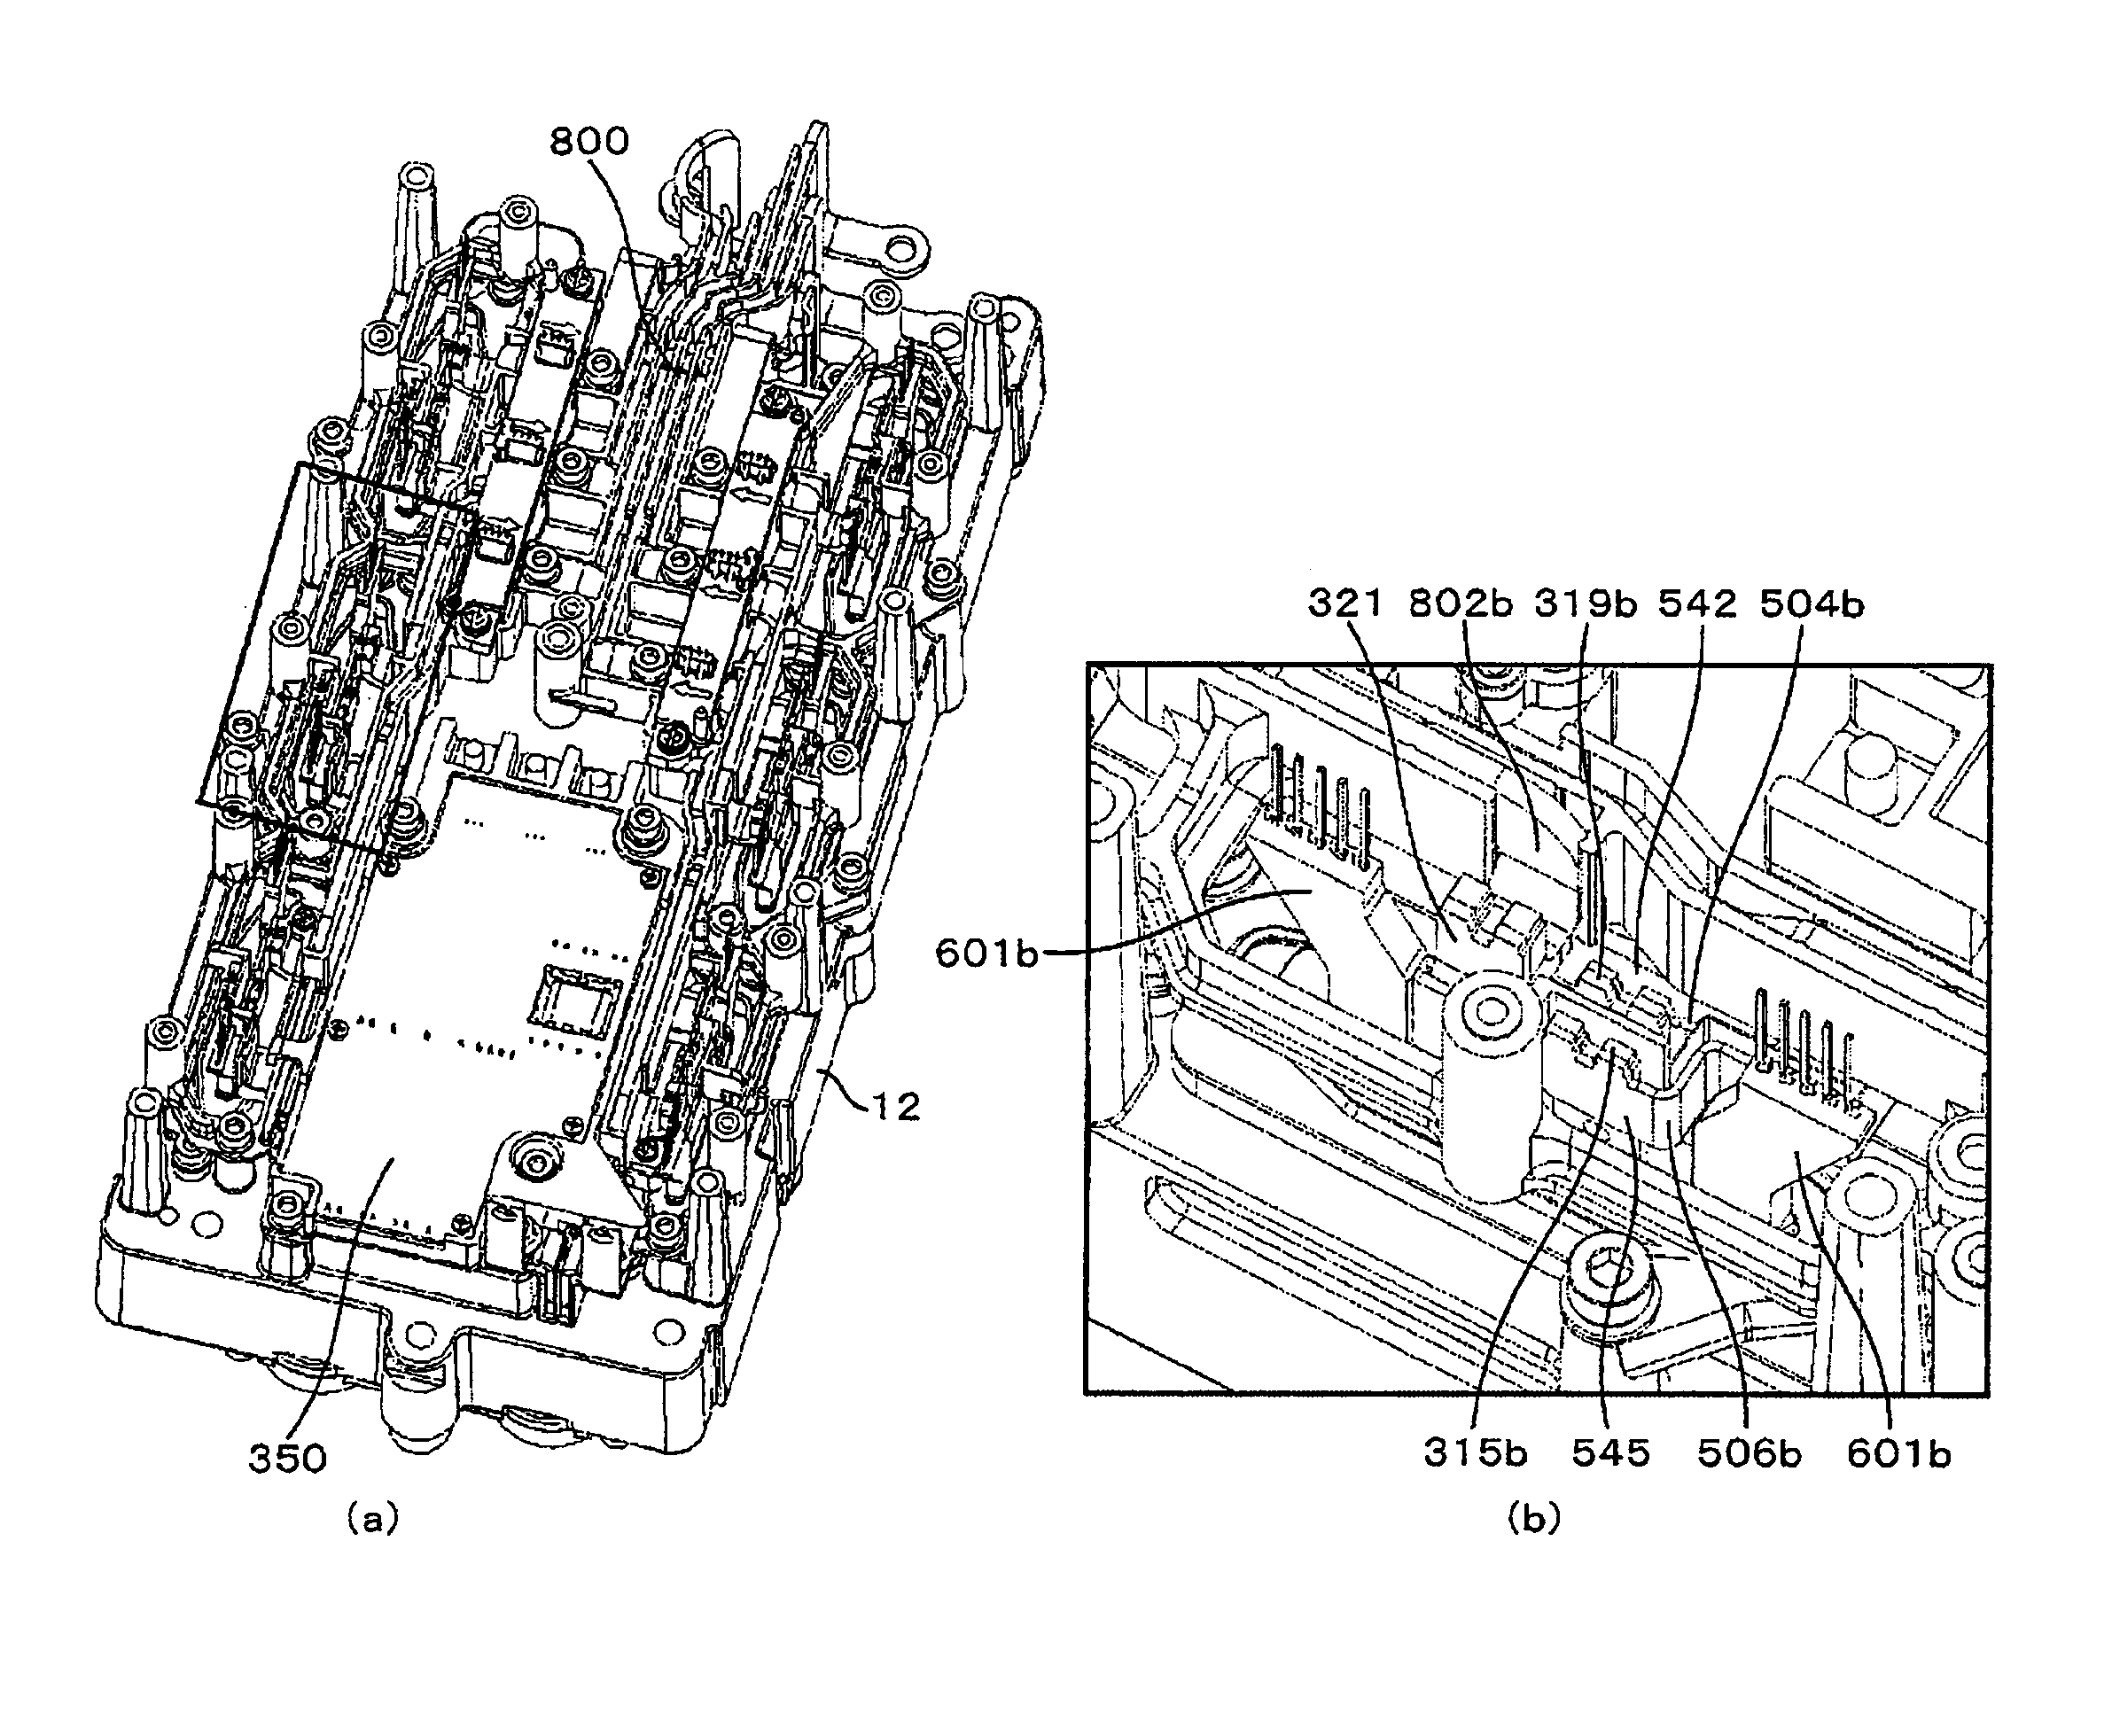 Power Module and Power Converter Containing Power Module